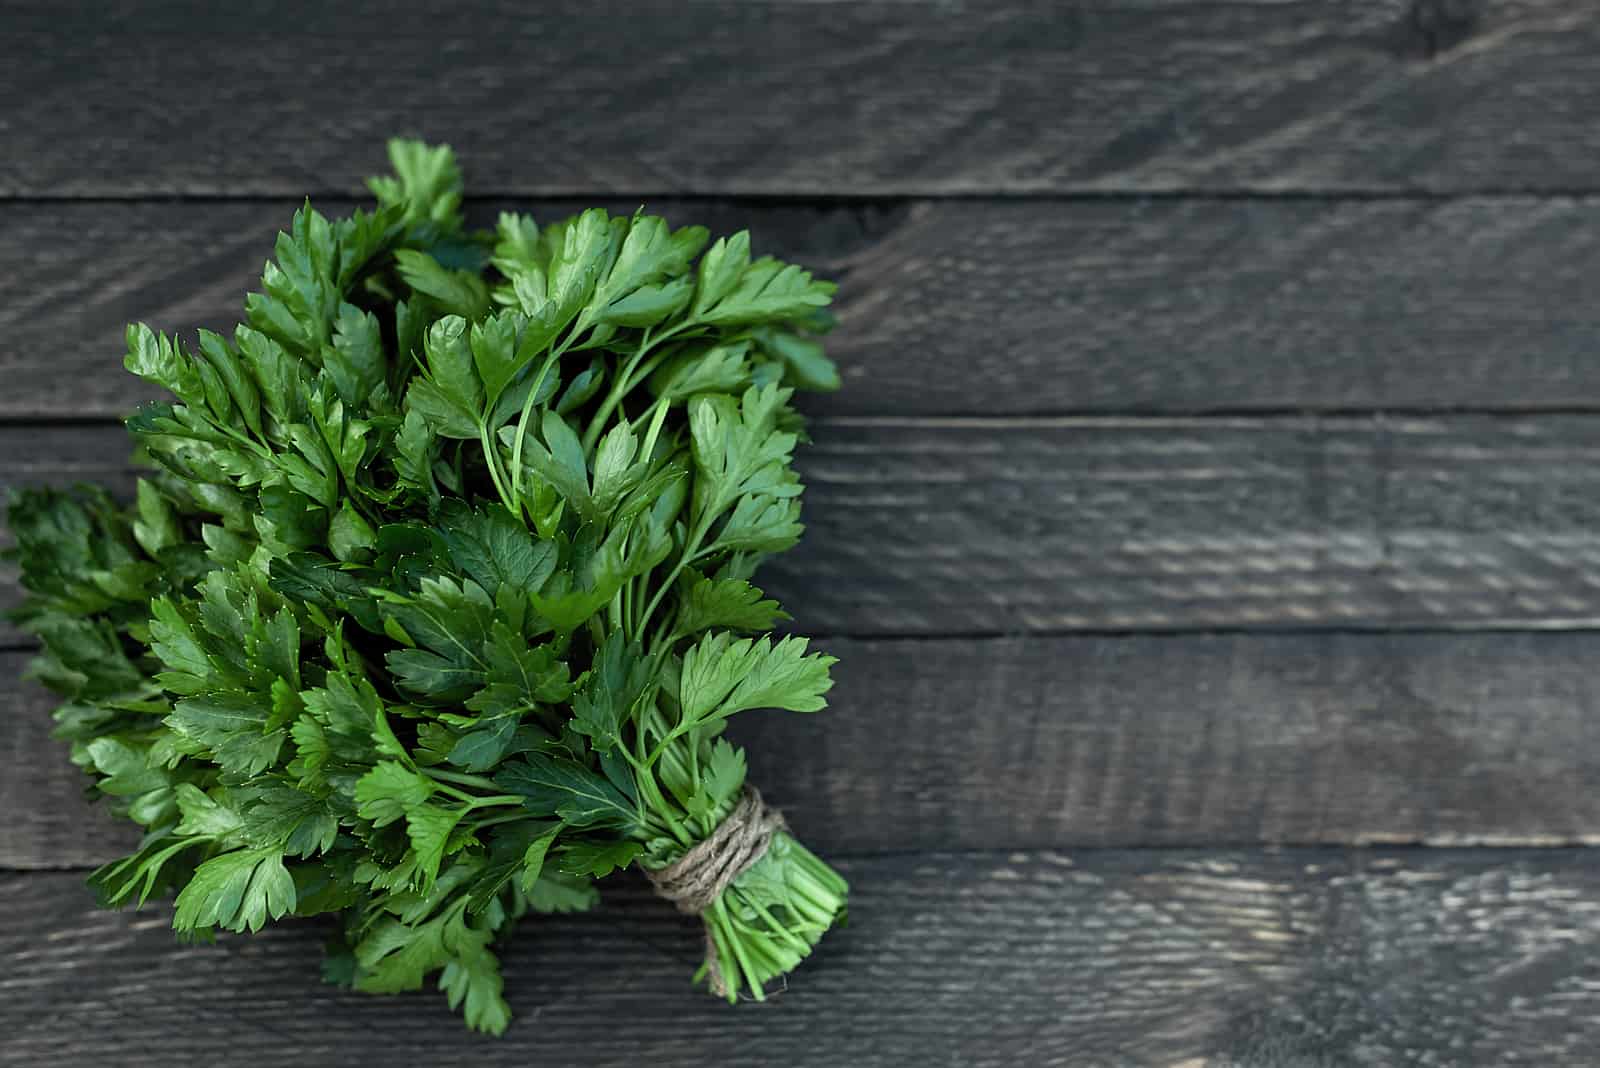 How To Harvest Parsley Without Killing The Plant – 7 Brilliant Tips